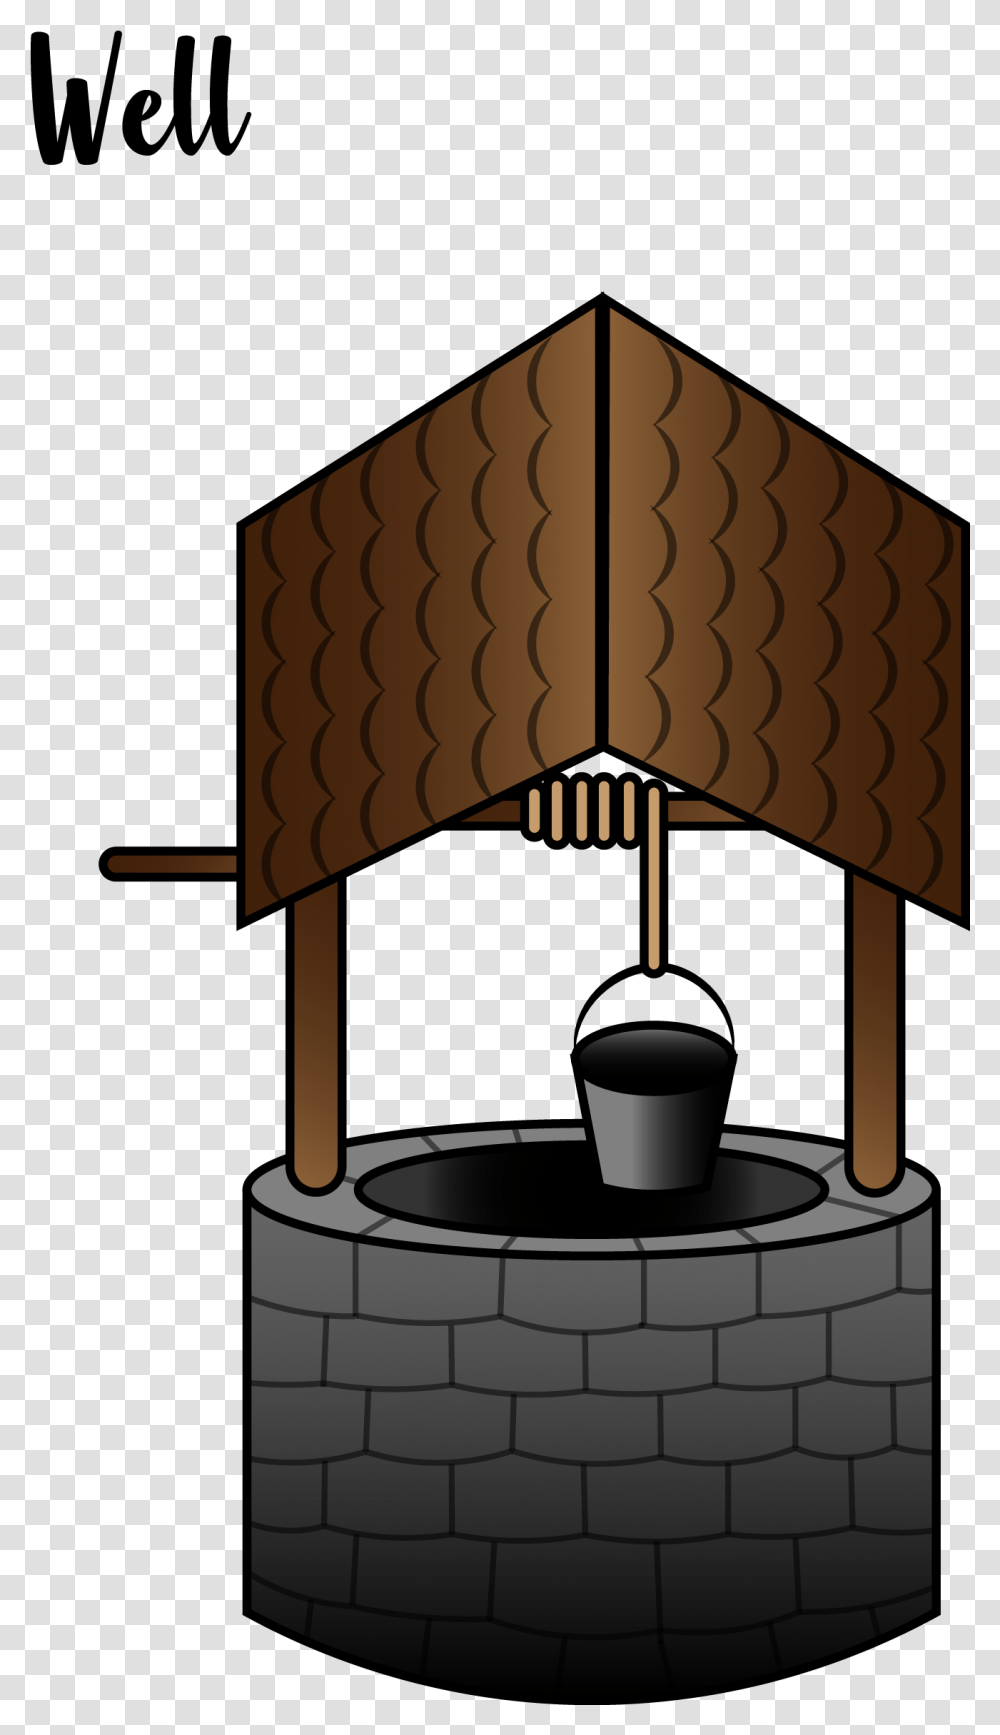 Well Illustration, Lamp, Wood, Architecture, Building Transparent Png